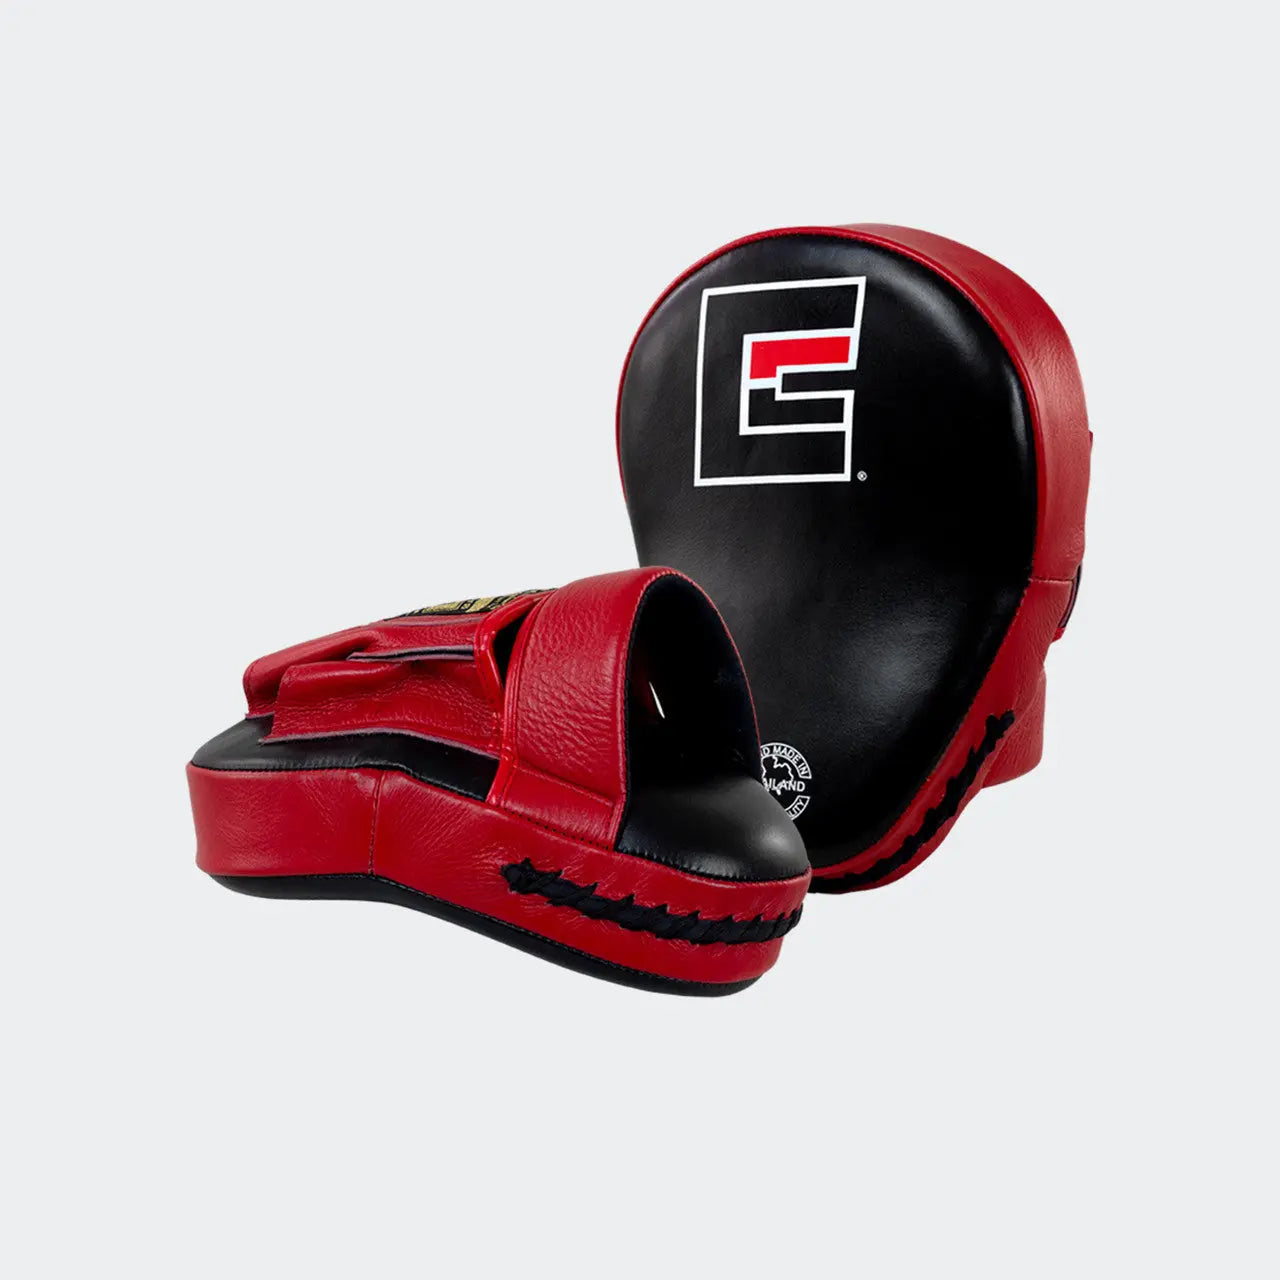 HMIT PUNCH MITTS - Prime Combats